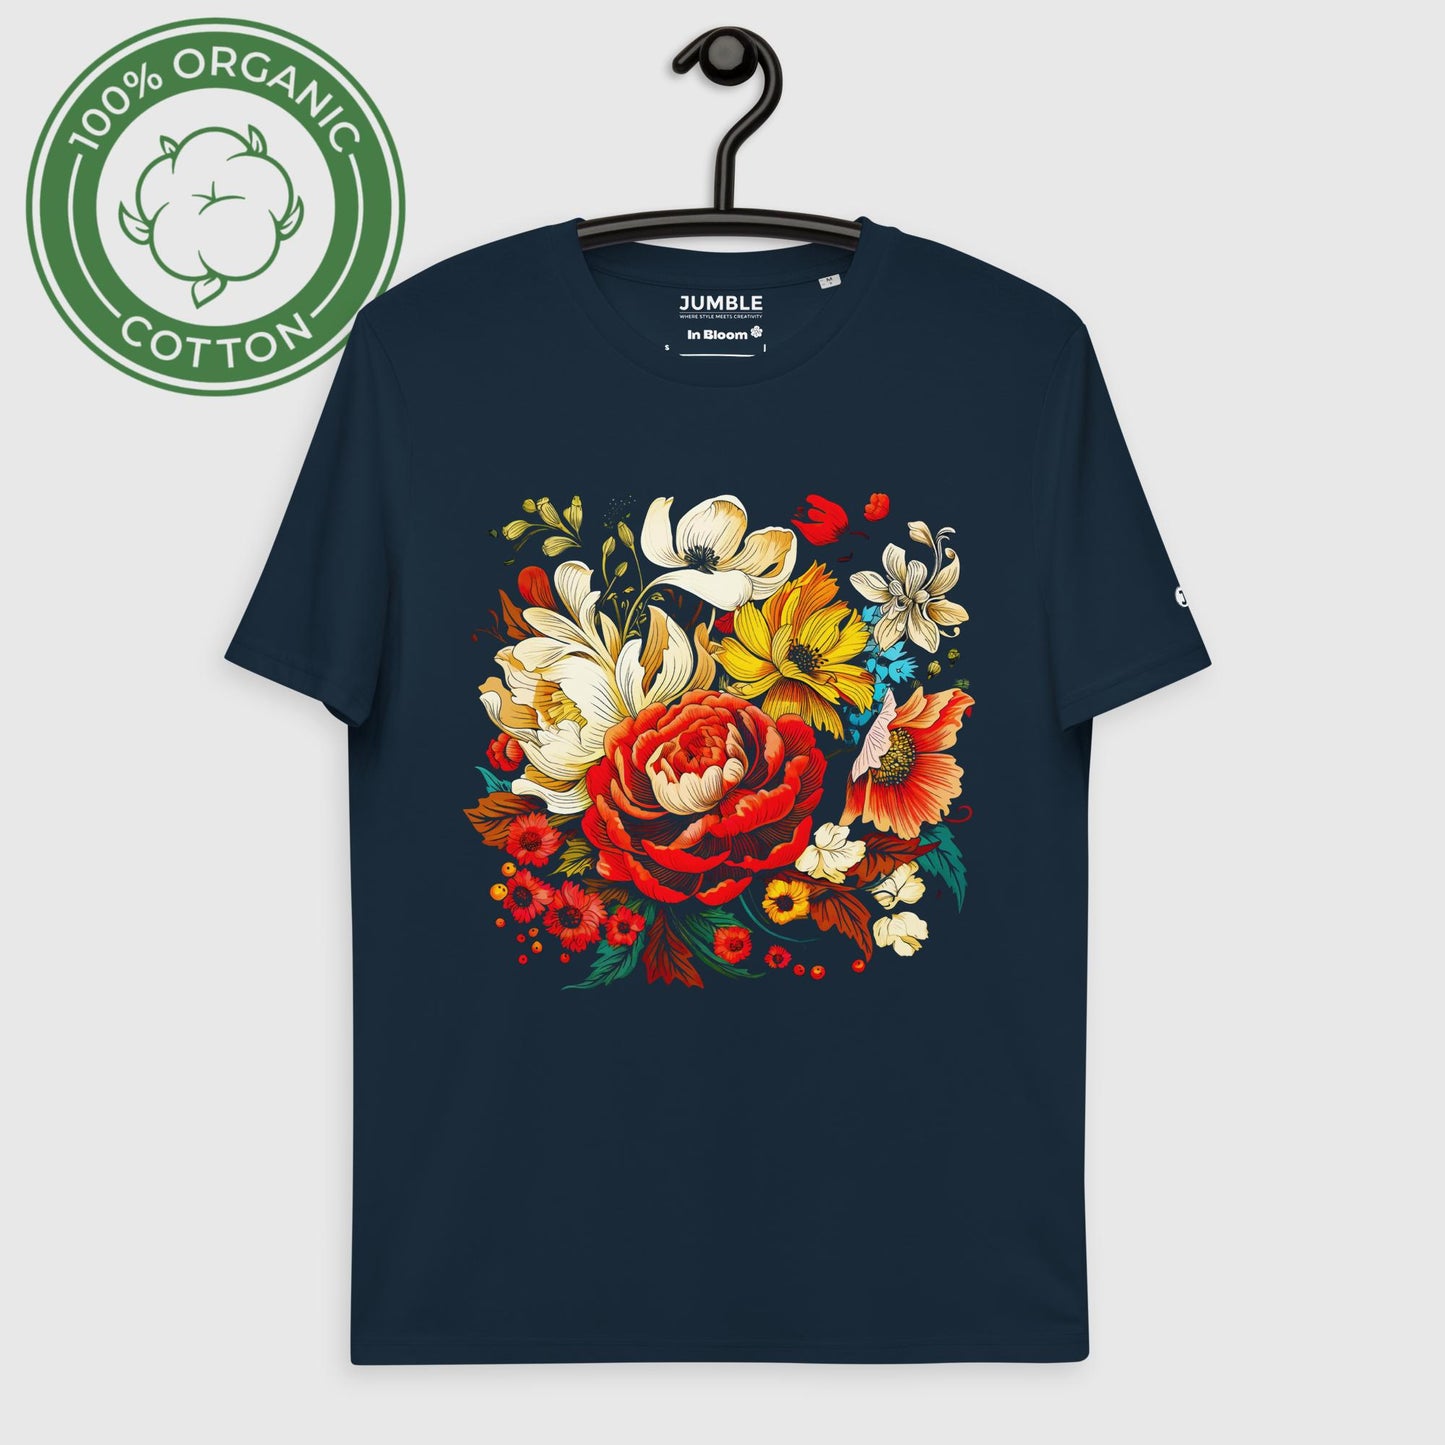 In Bloom Organic Cotton Unisex Tee - French Navy Color - On Hanger